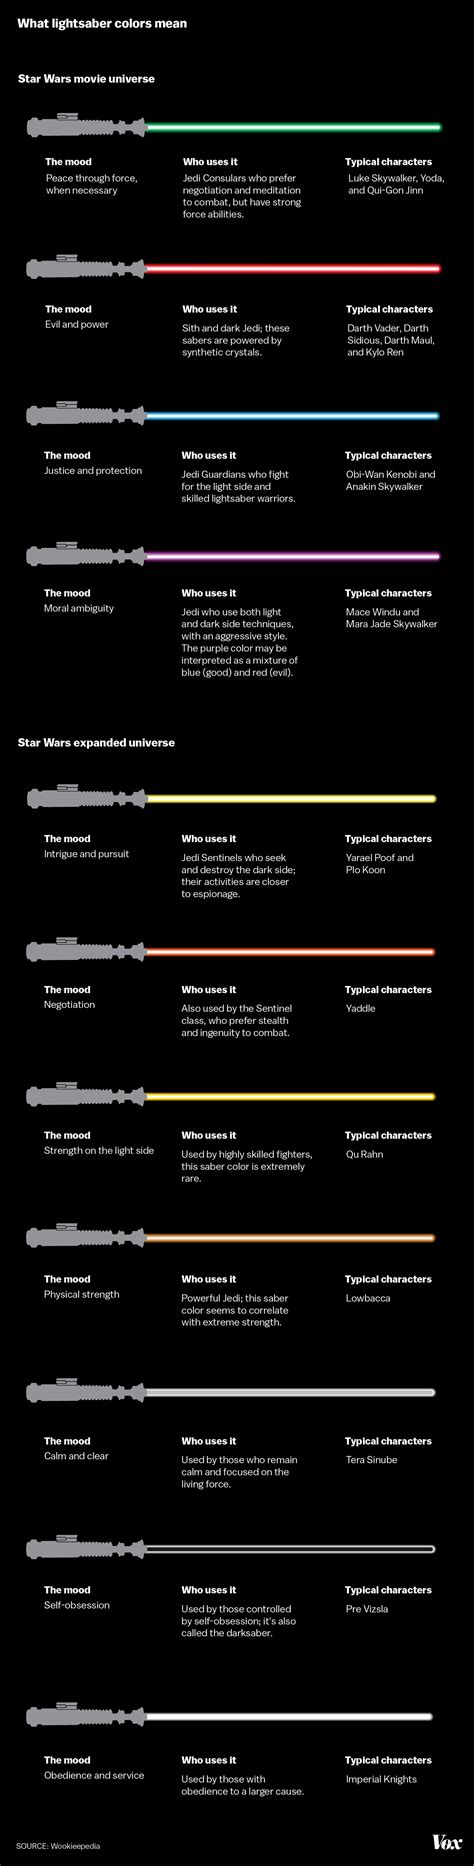 Star Wars Lightsaber Colors and Meaning : r/coolguides